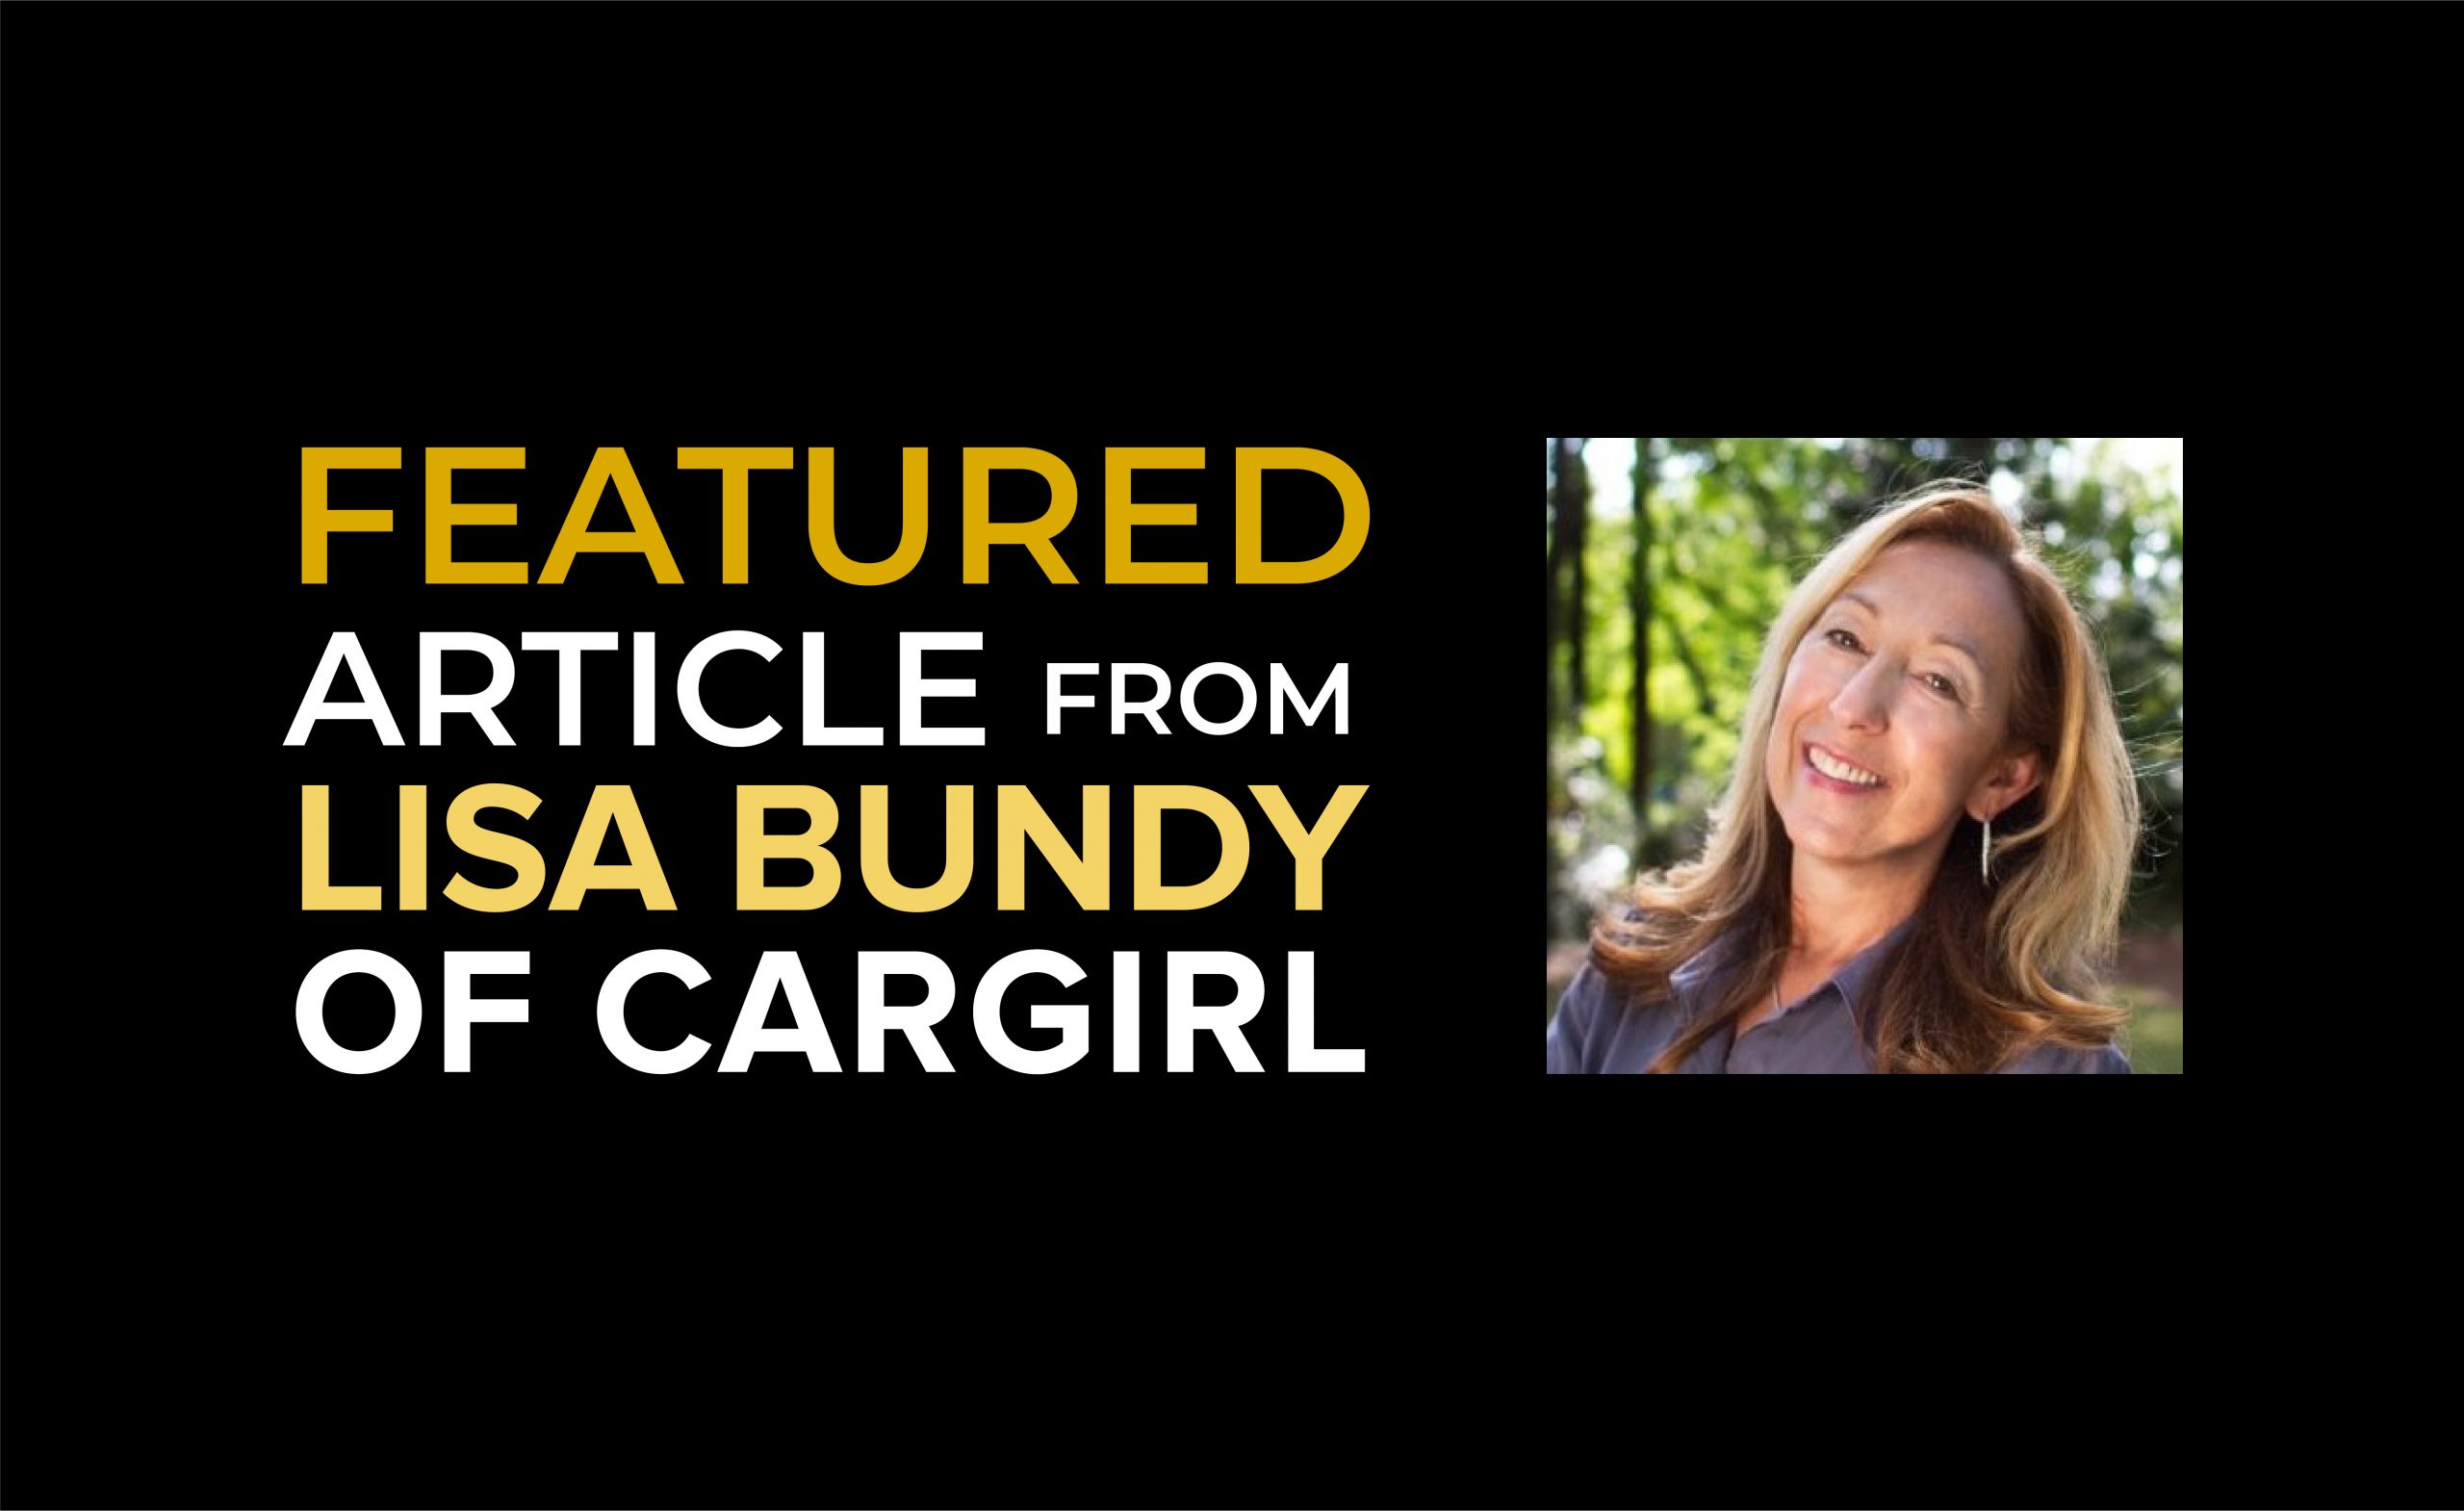 Featured Article from Lisa Bundy of Cargirl